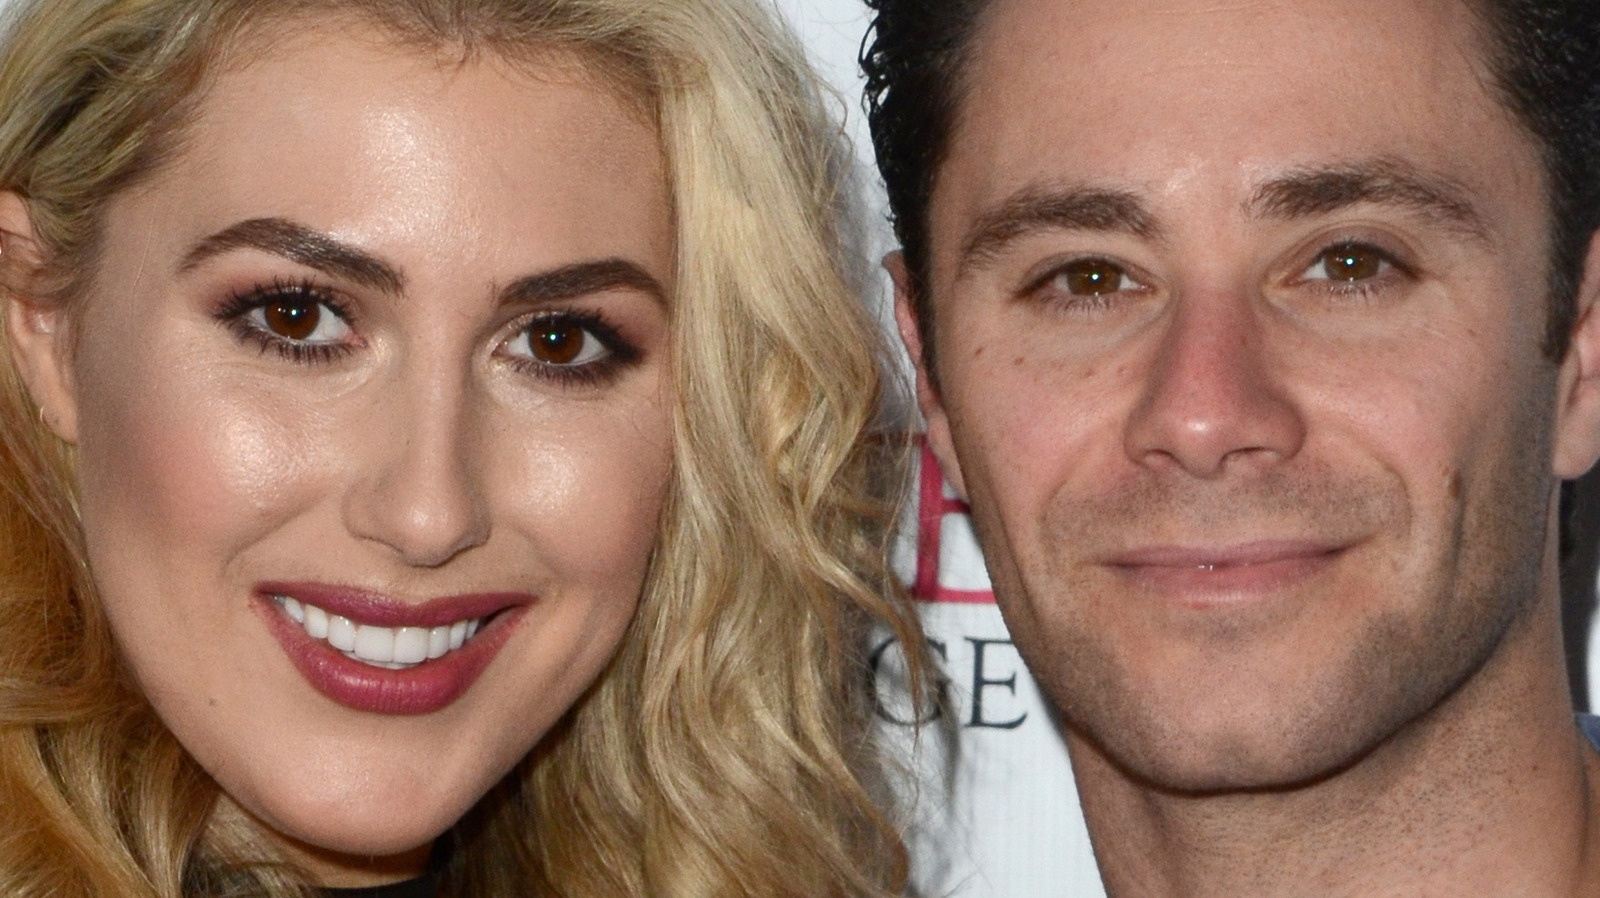 Sasha Farber and Emma Slater, DWTS Pros, Share Heartbreaking News About Their Marriage